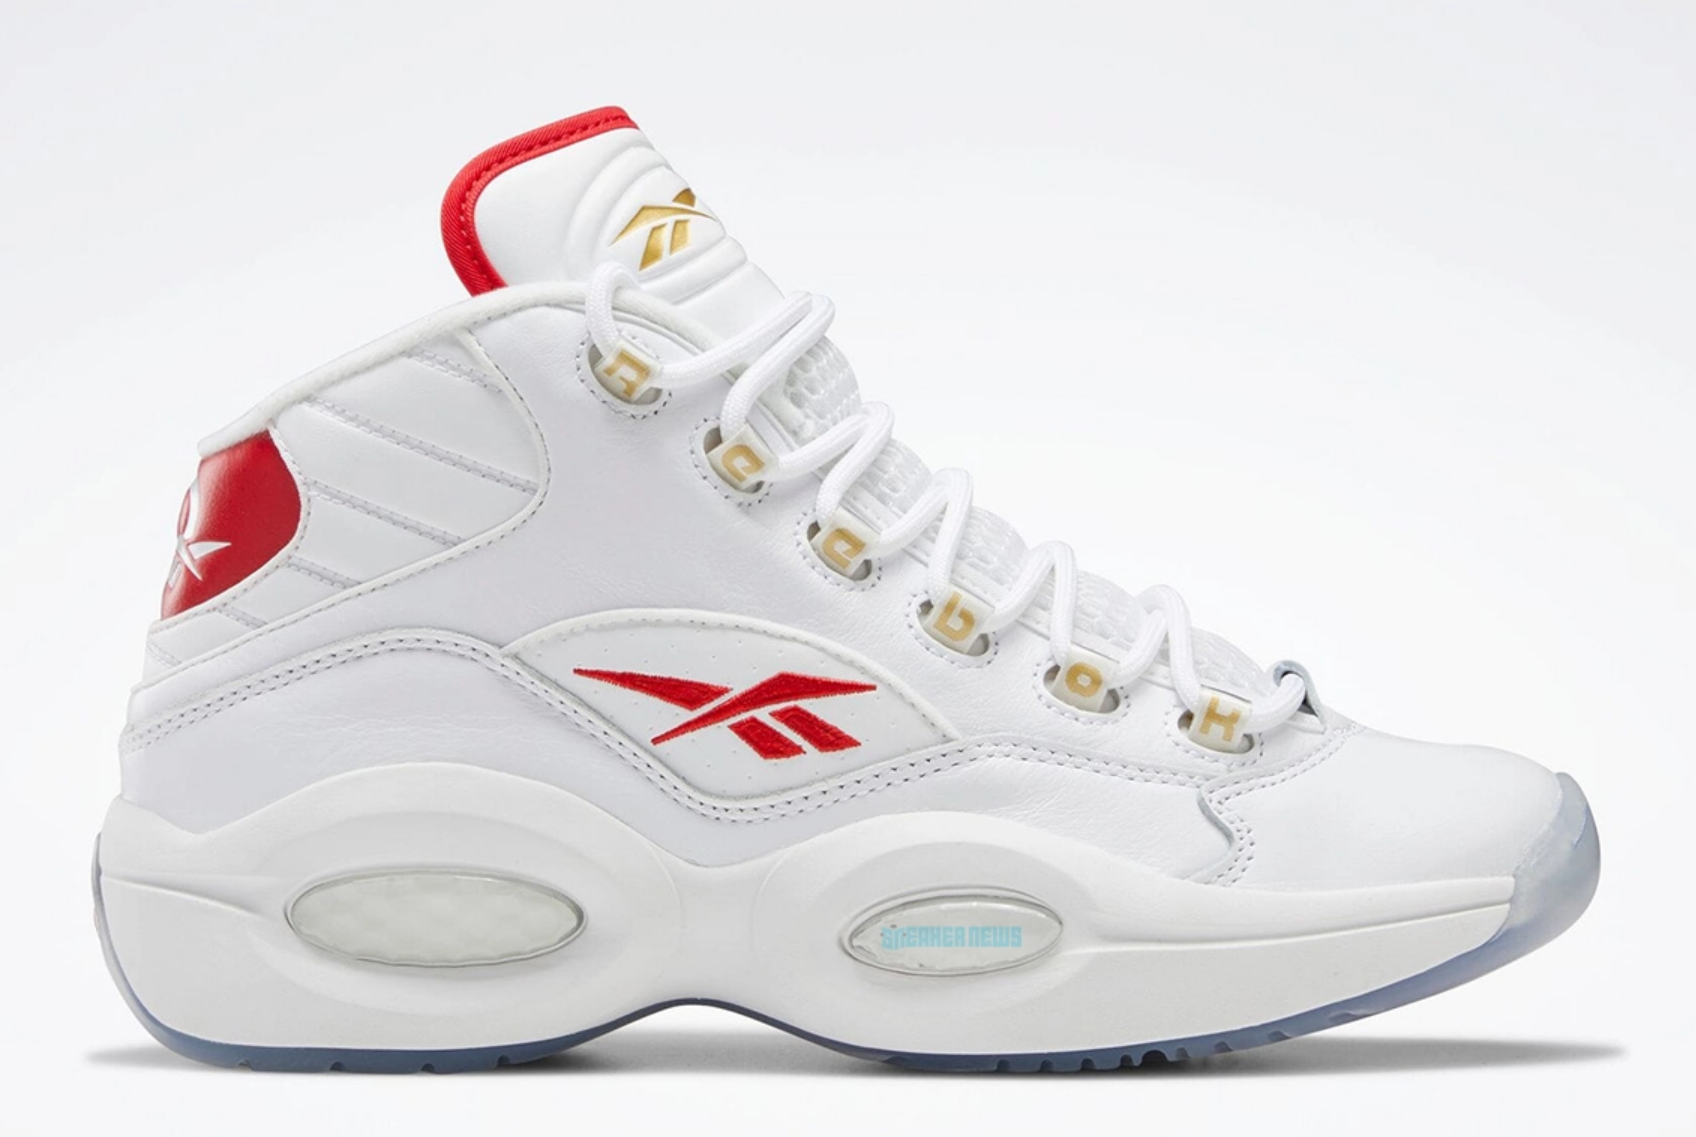 Reebok Question Mid “The Cross Over”